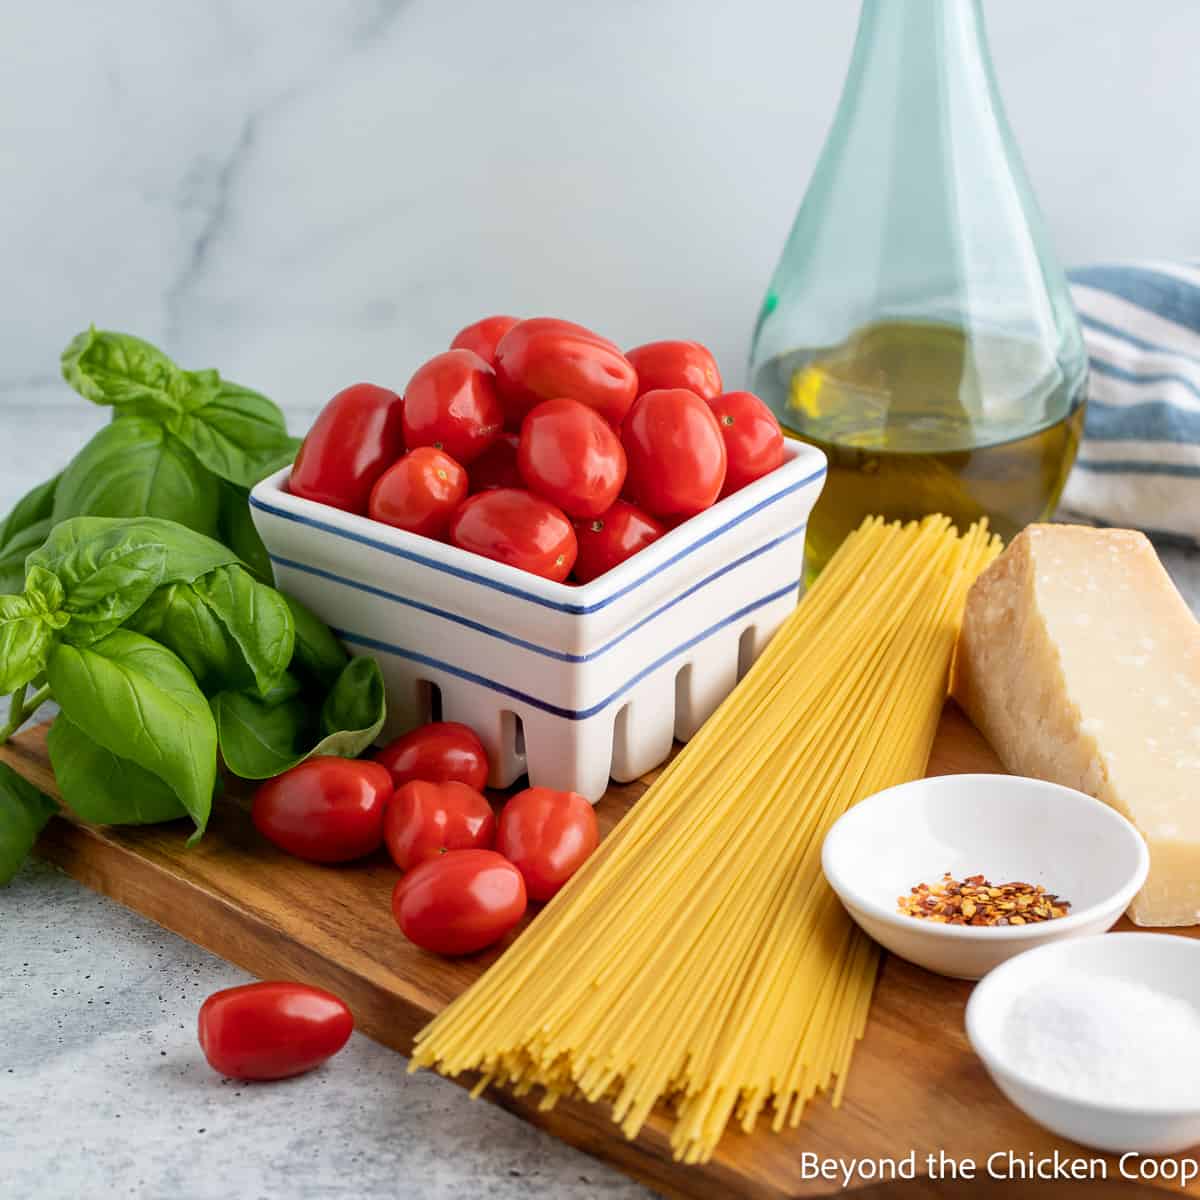 Ingredients for making a pasta dish with tomatoes and basil. 